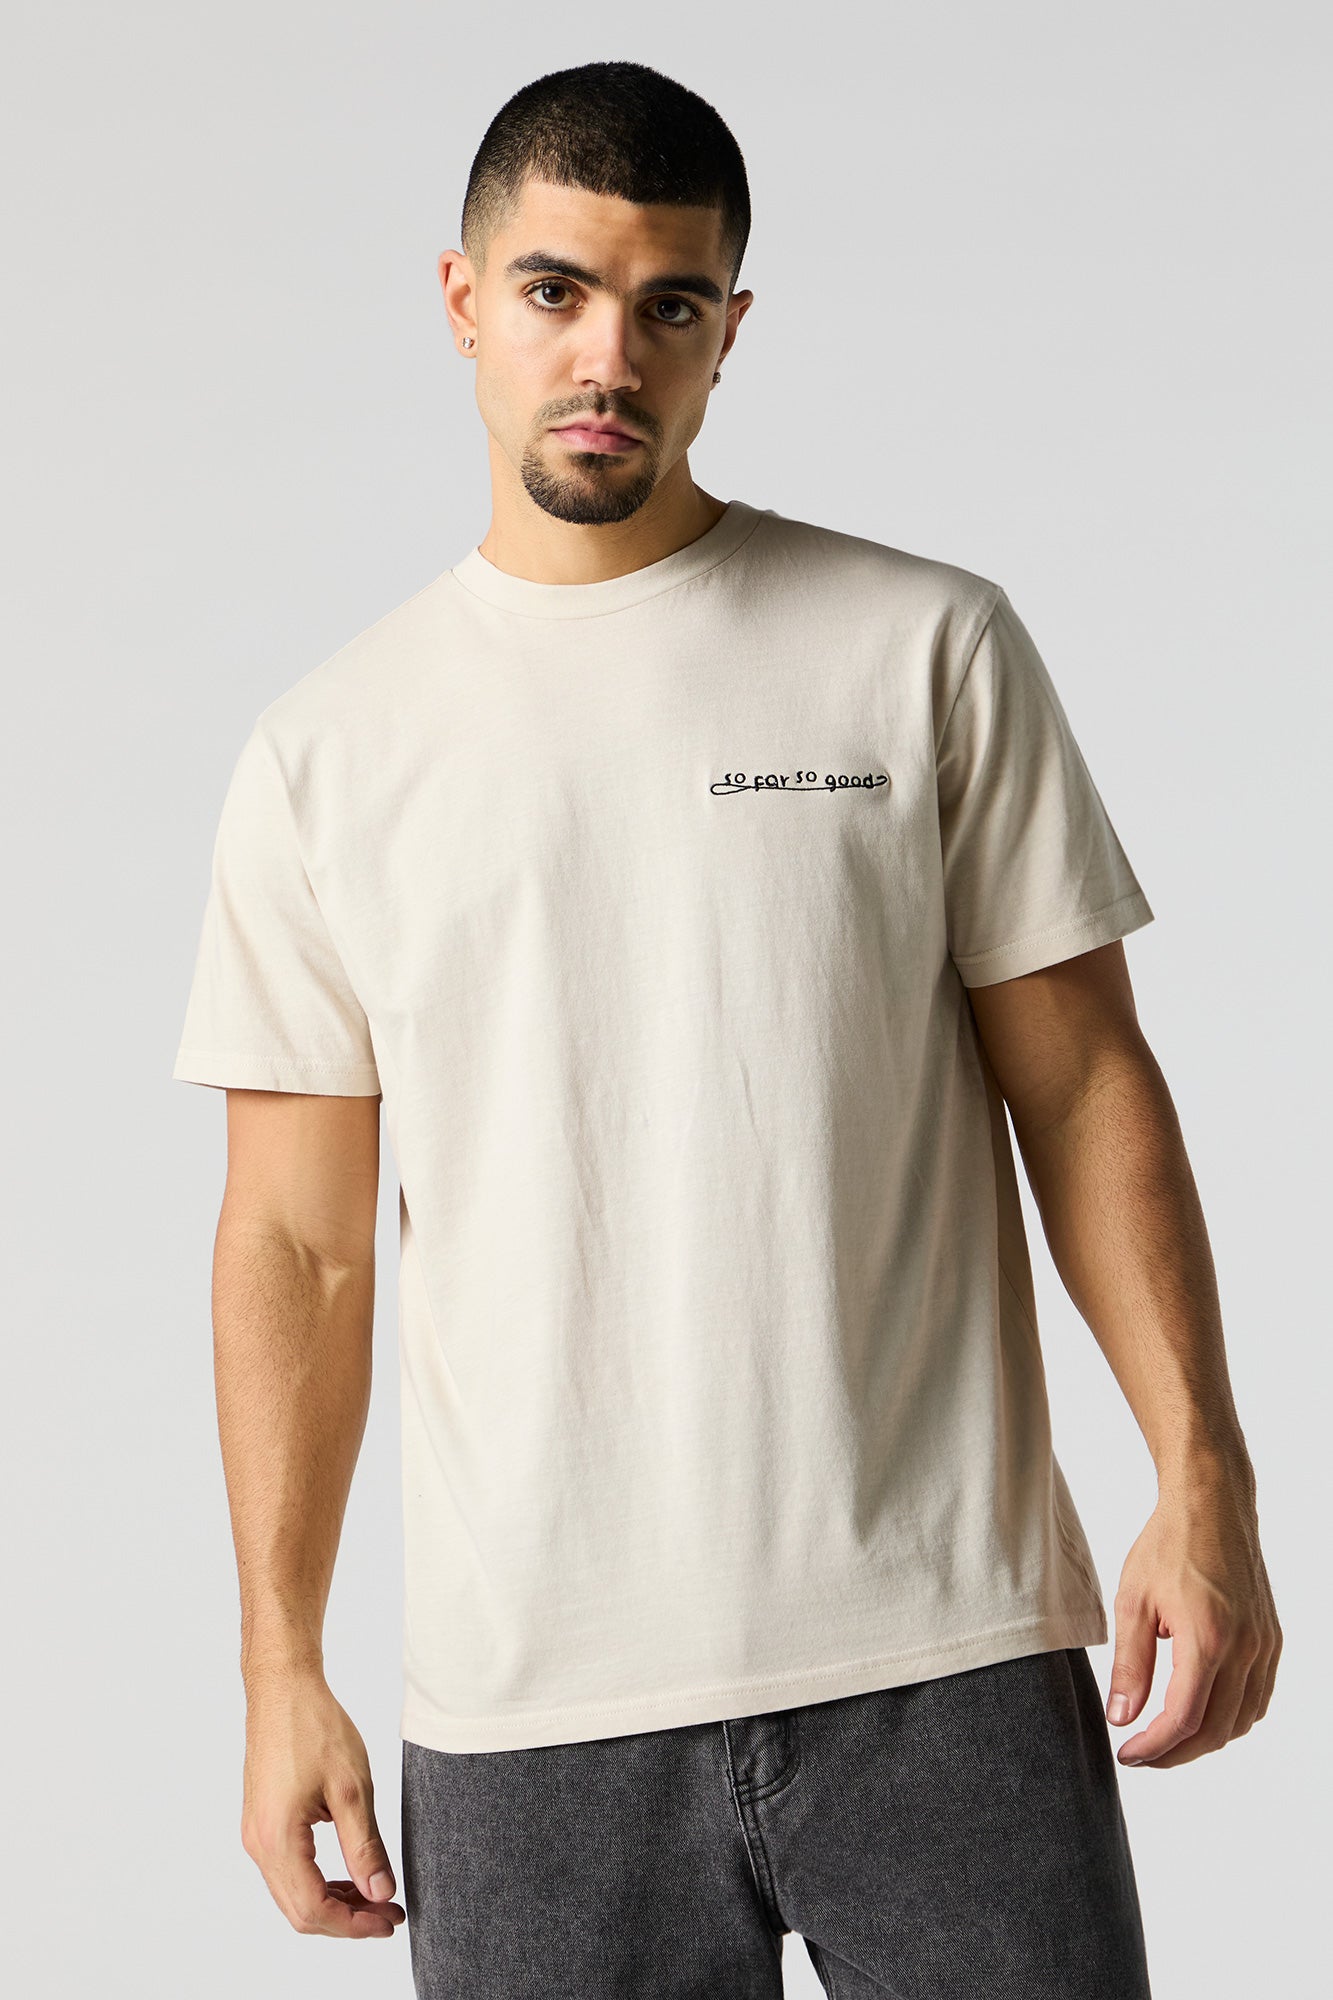 So Far Good Embroidered T-Shirt